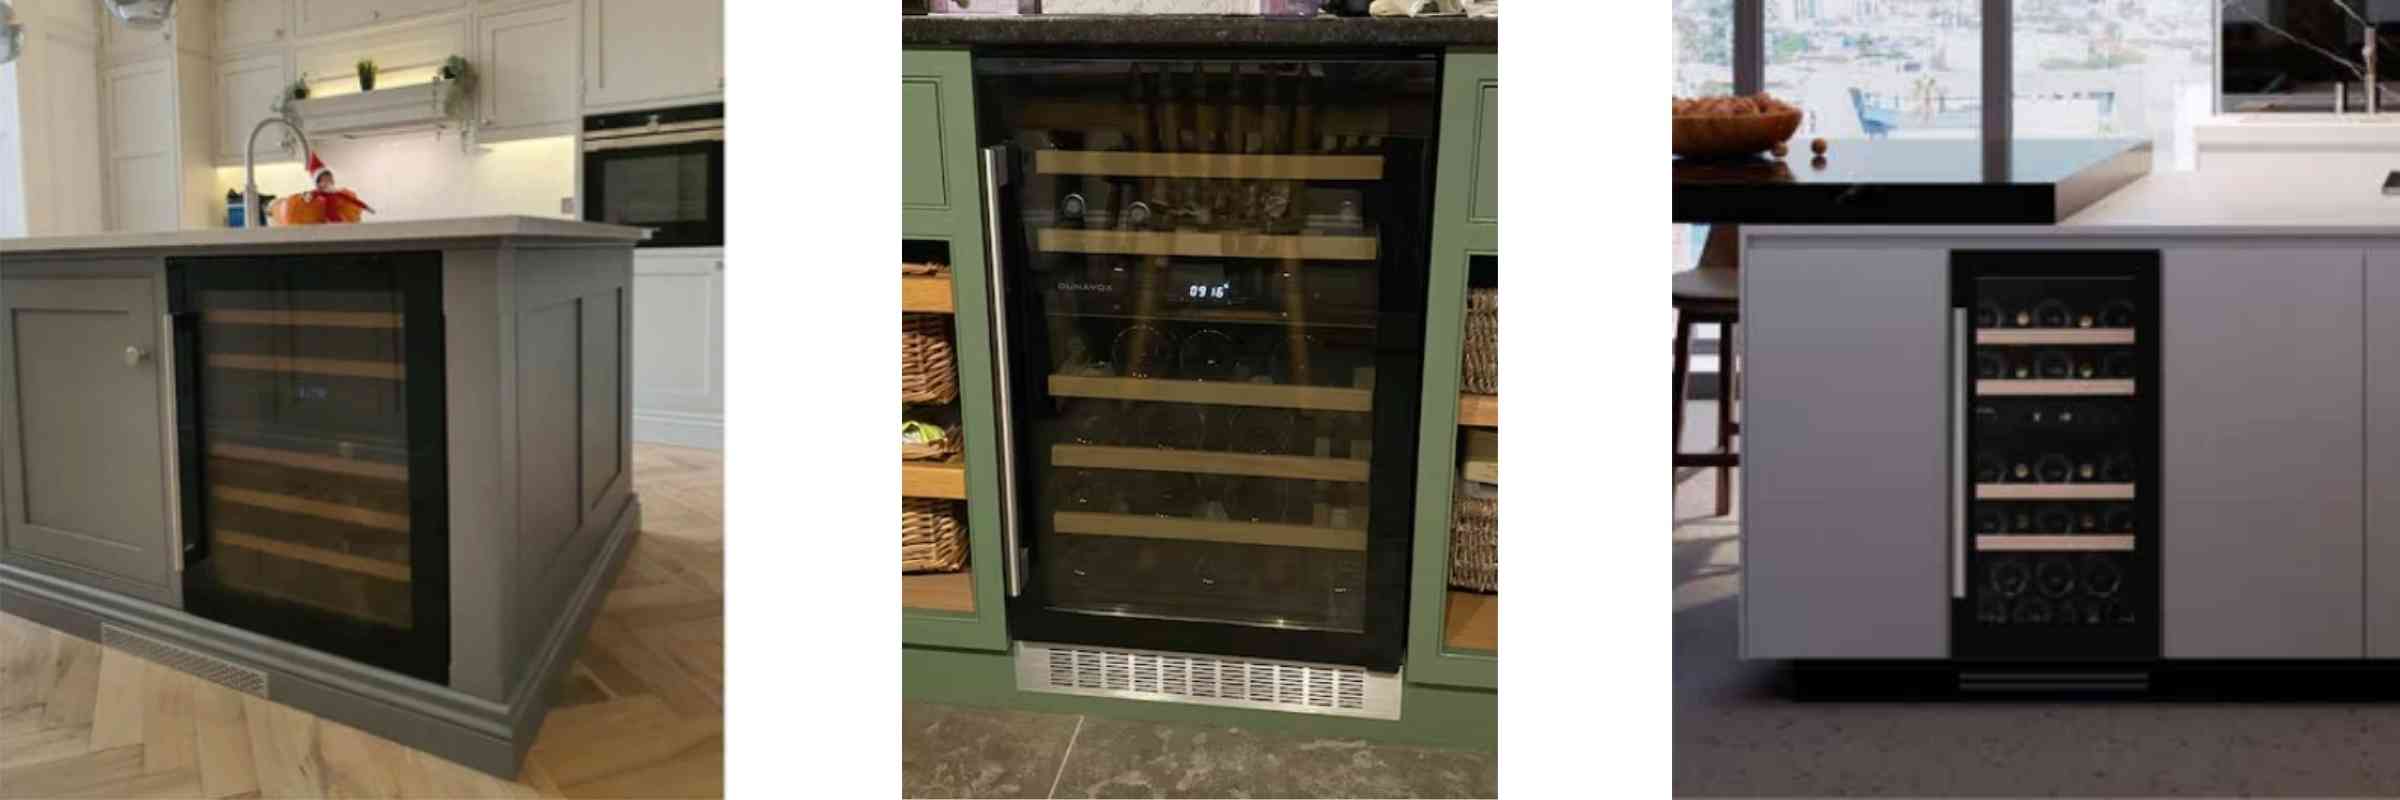 Built In Wine Cooler Dimensions Under Counter